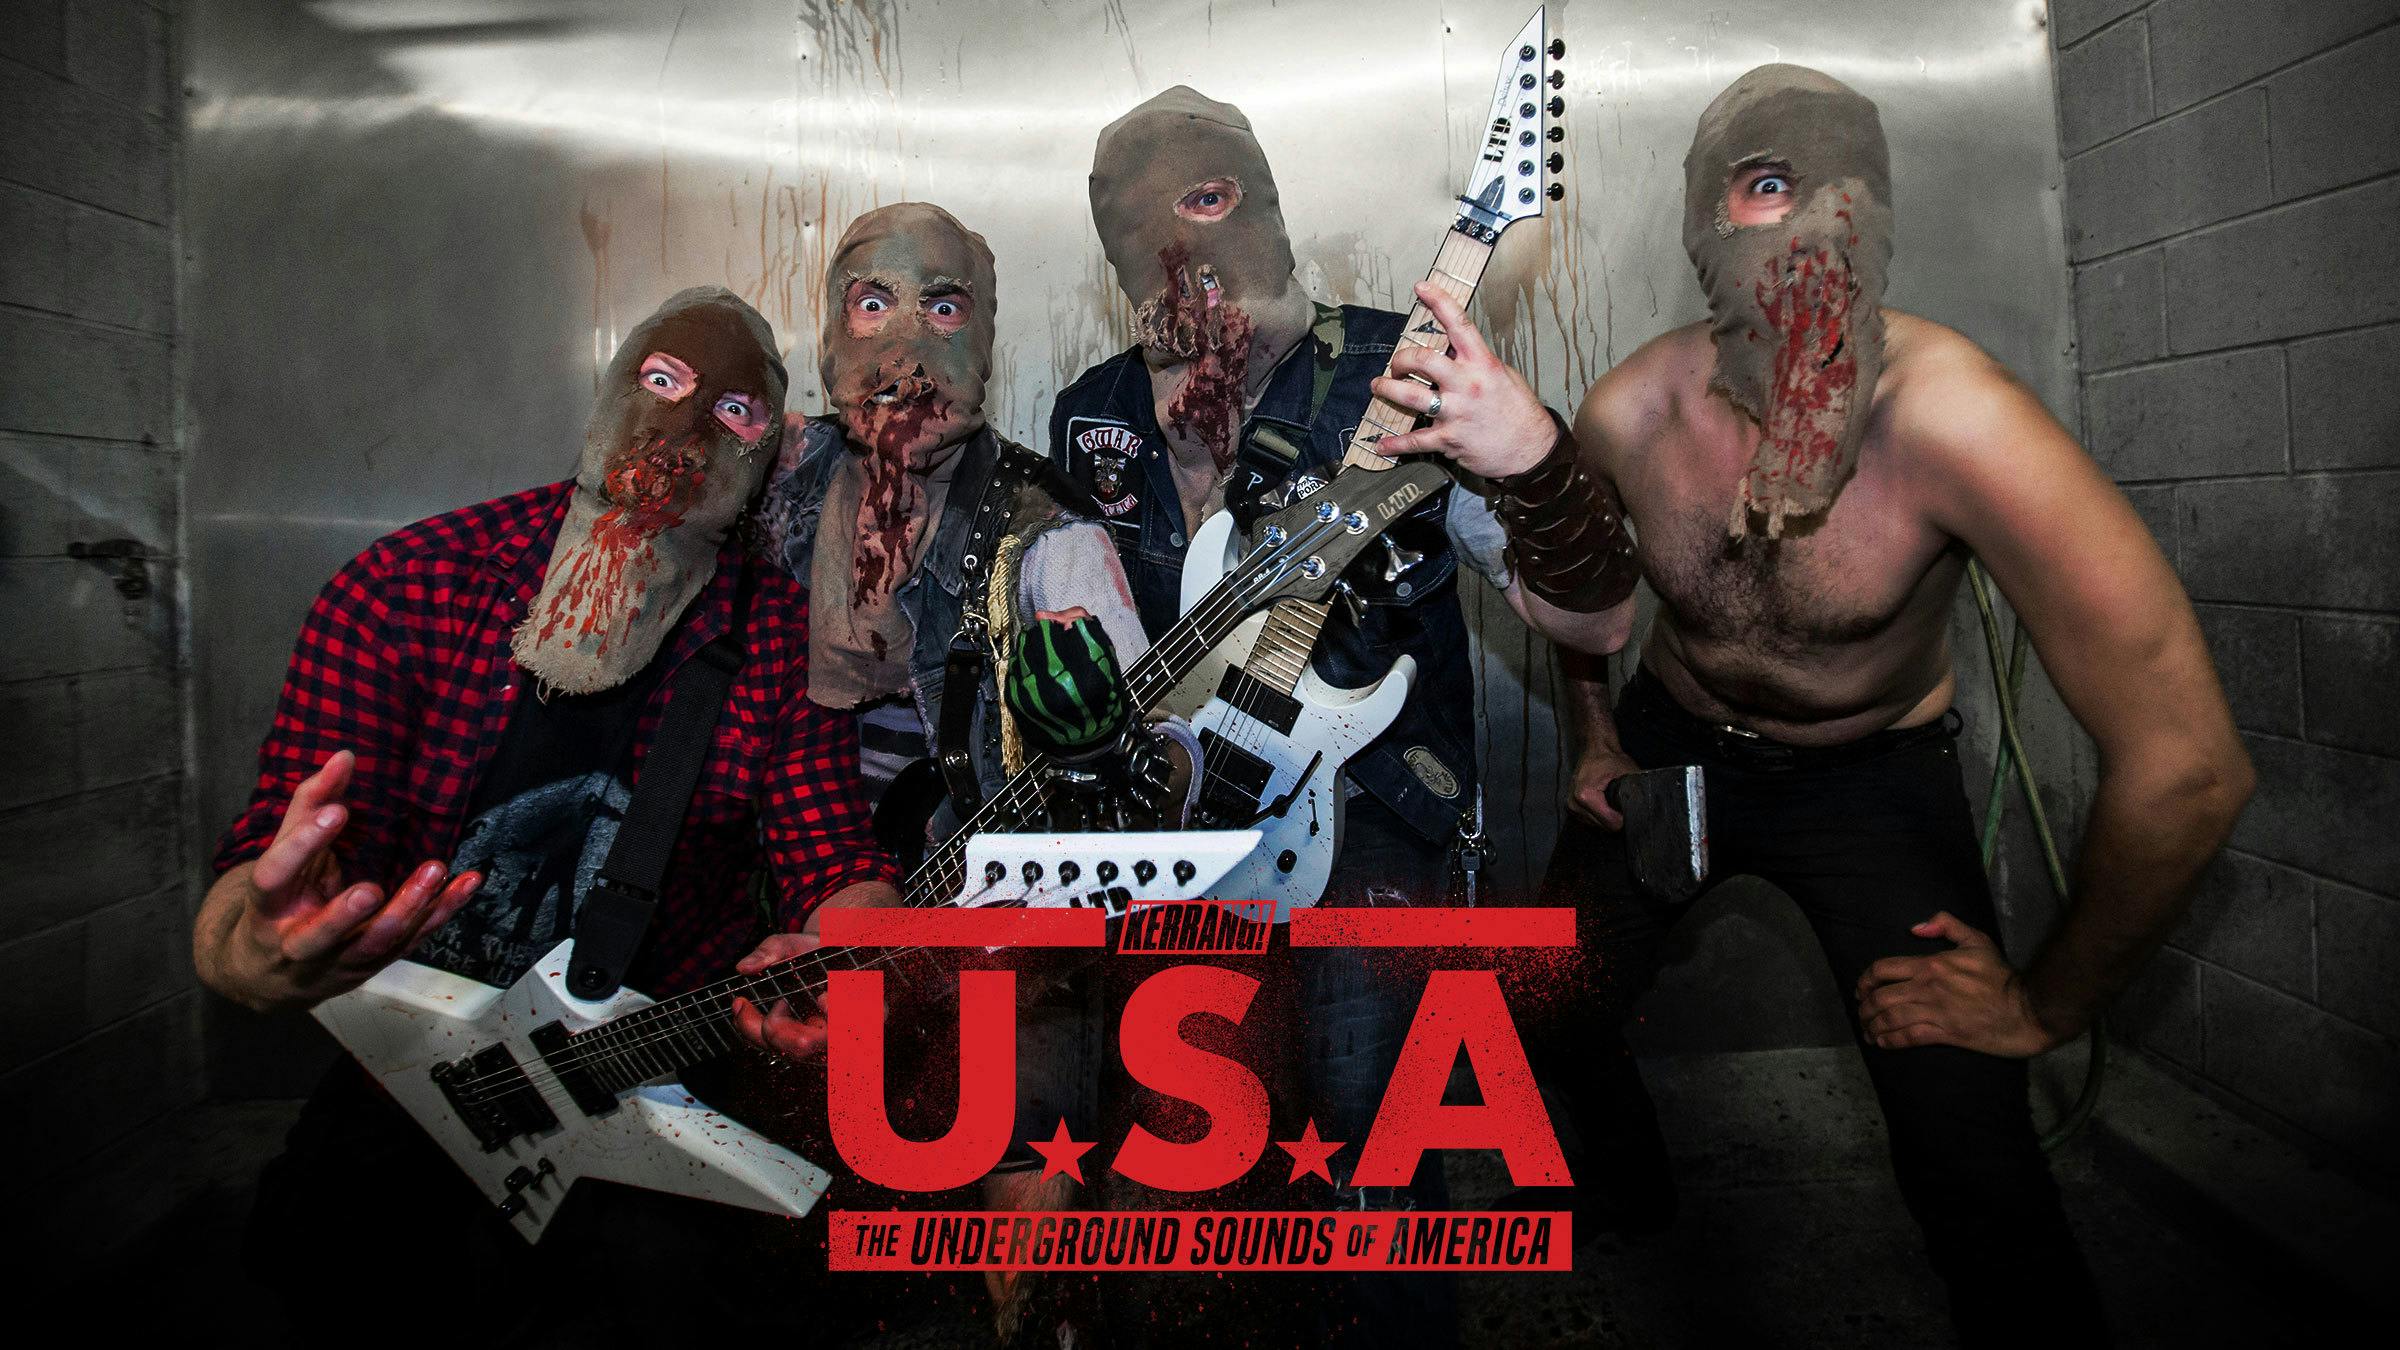 The Underground Sounds of America: Ghoul